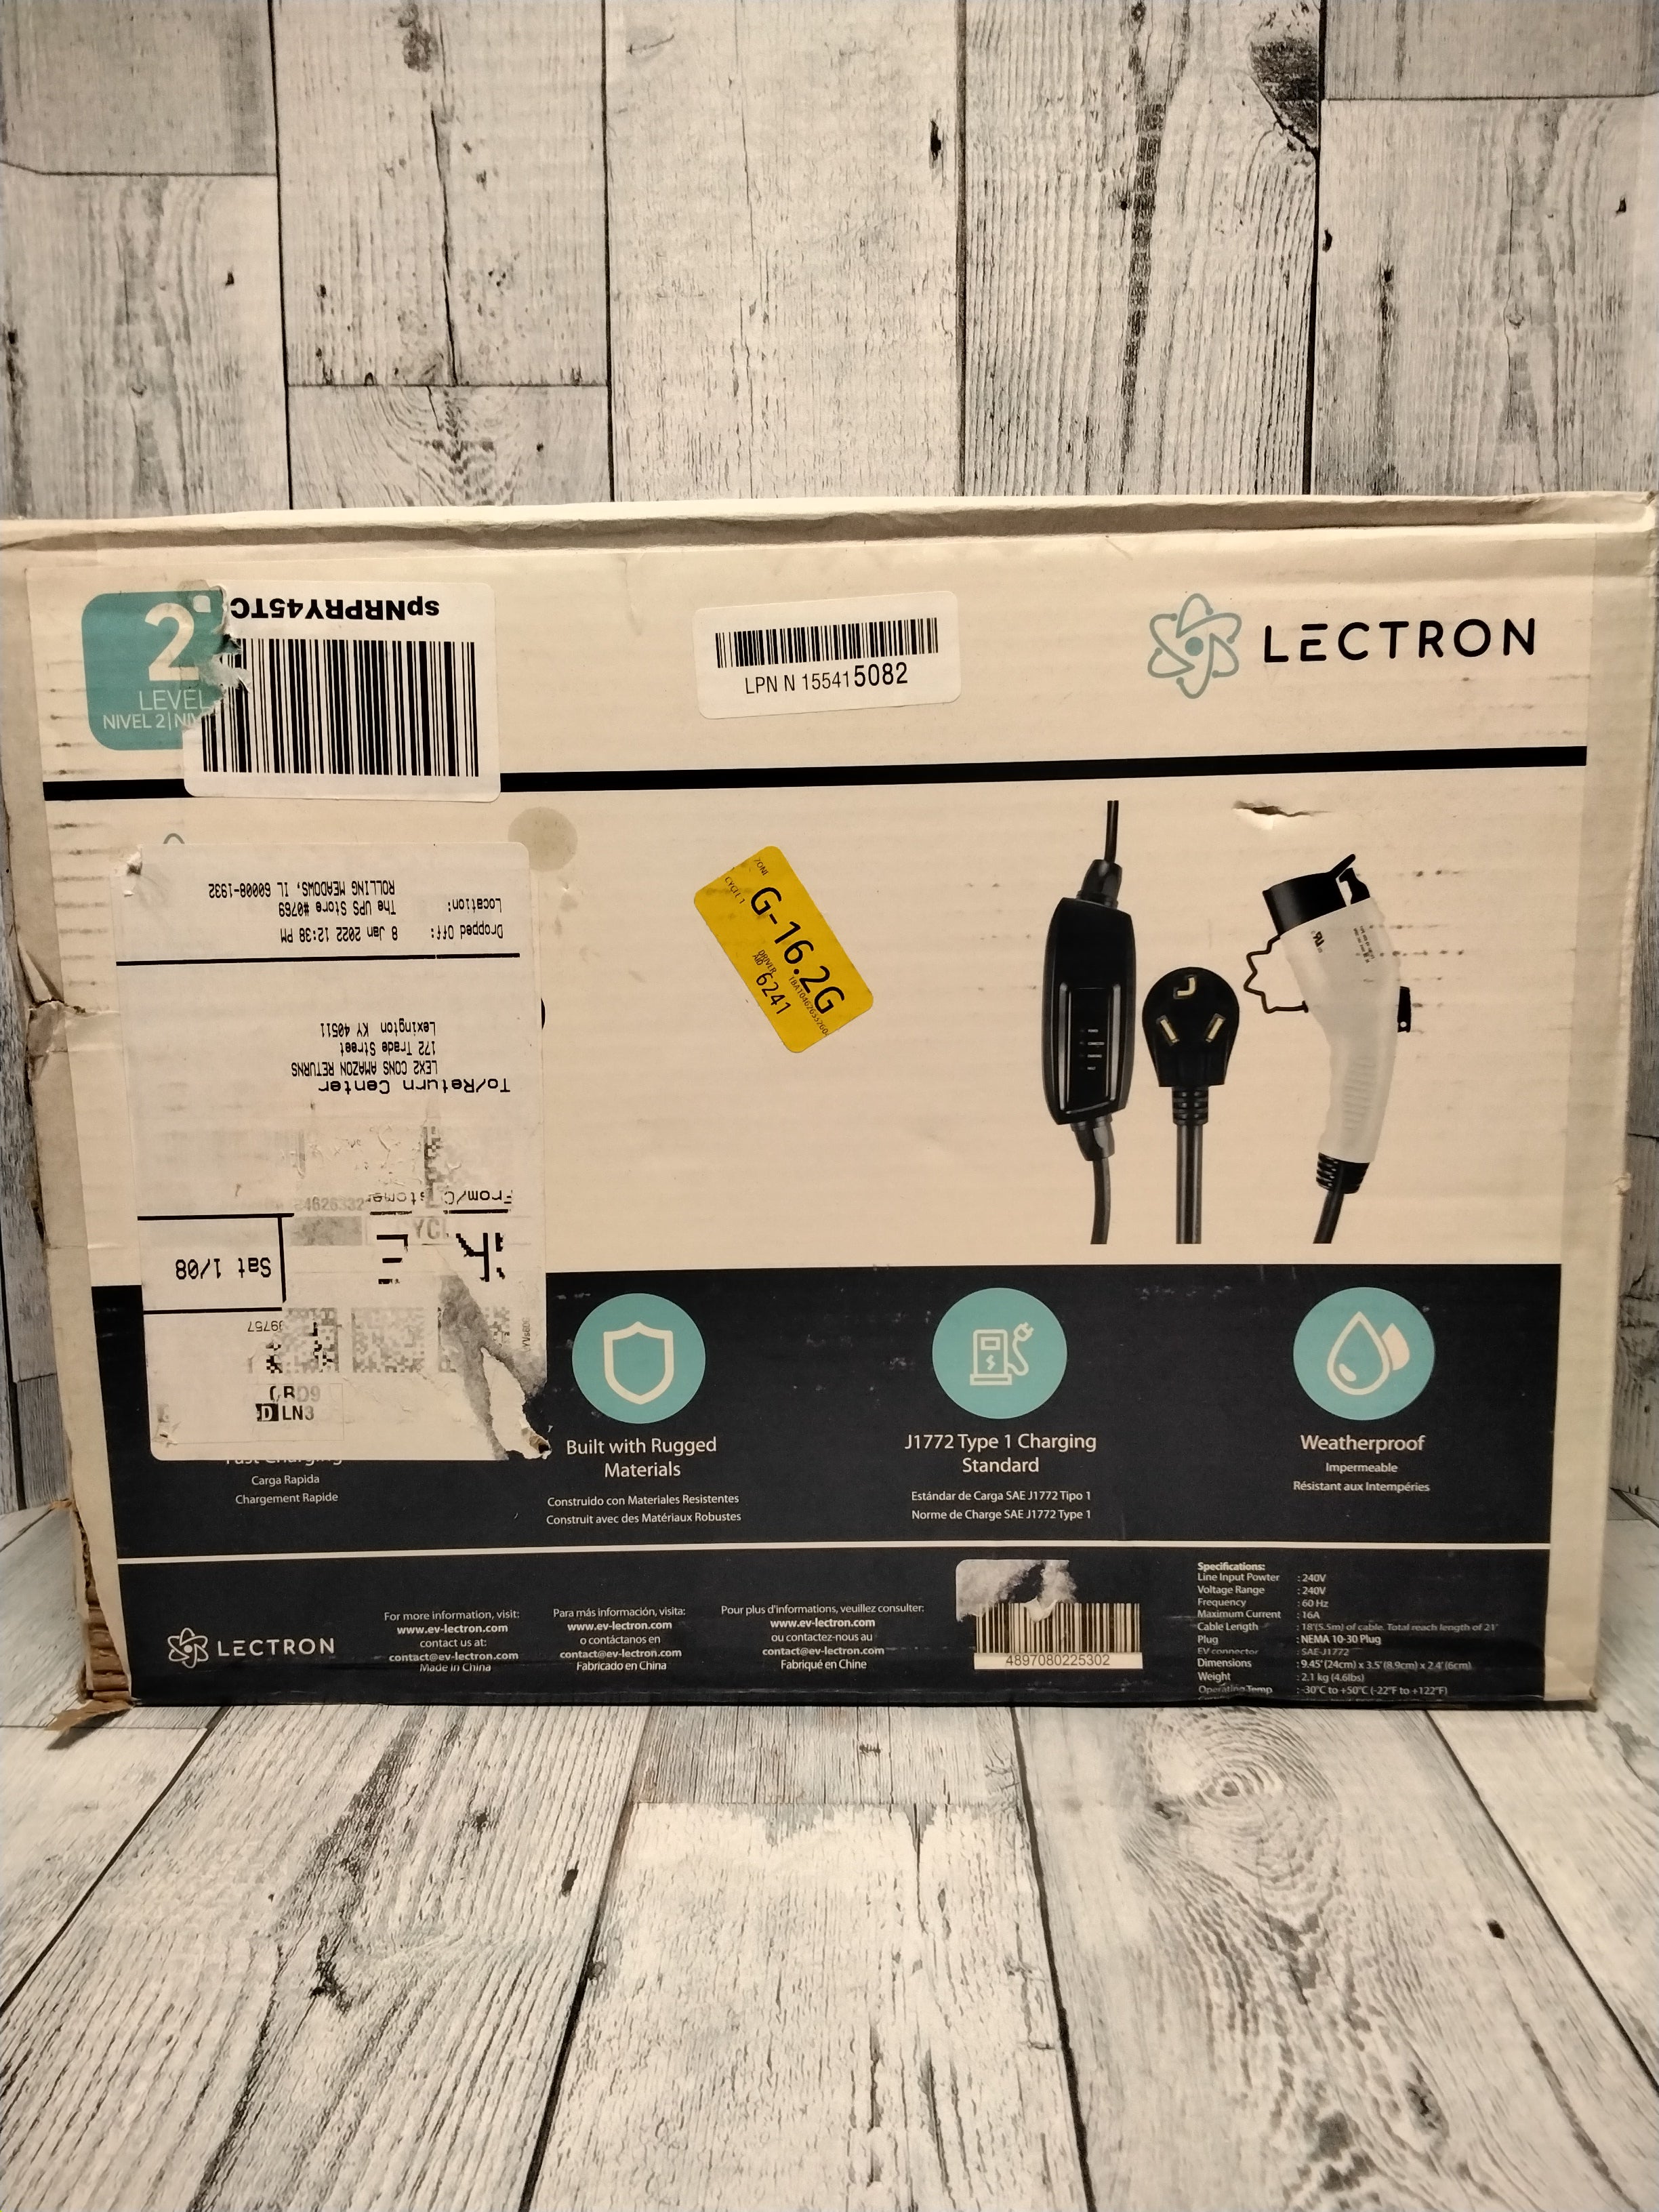 Lectron NEMA 5-15 Level 1 EV Charger - 110V 16 Amp with 21 ft Extension Cord (7776113590510)